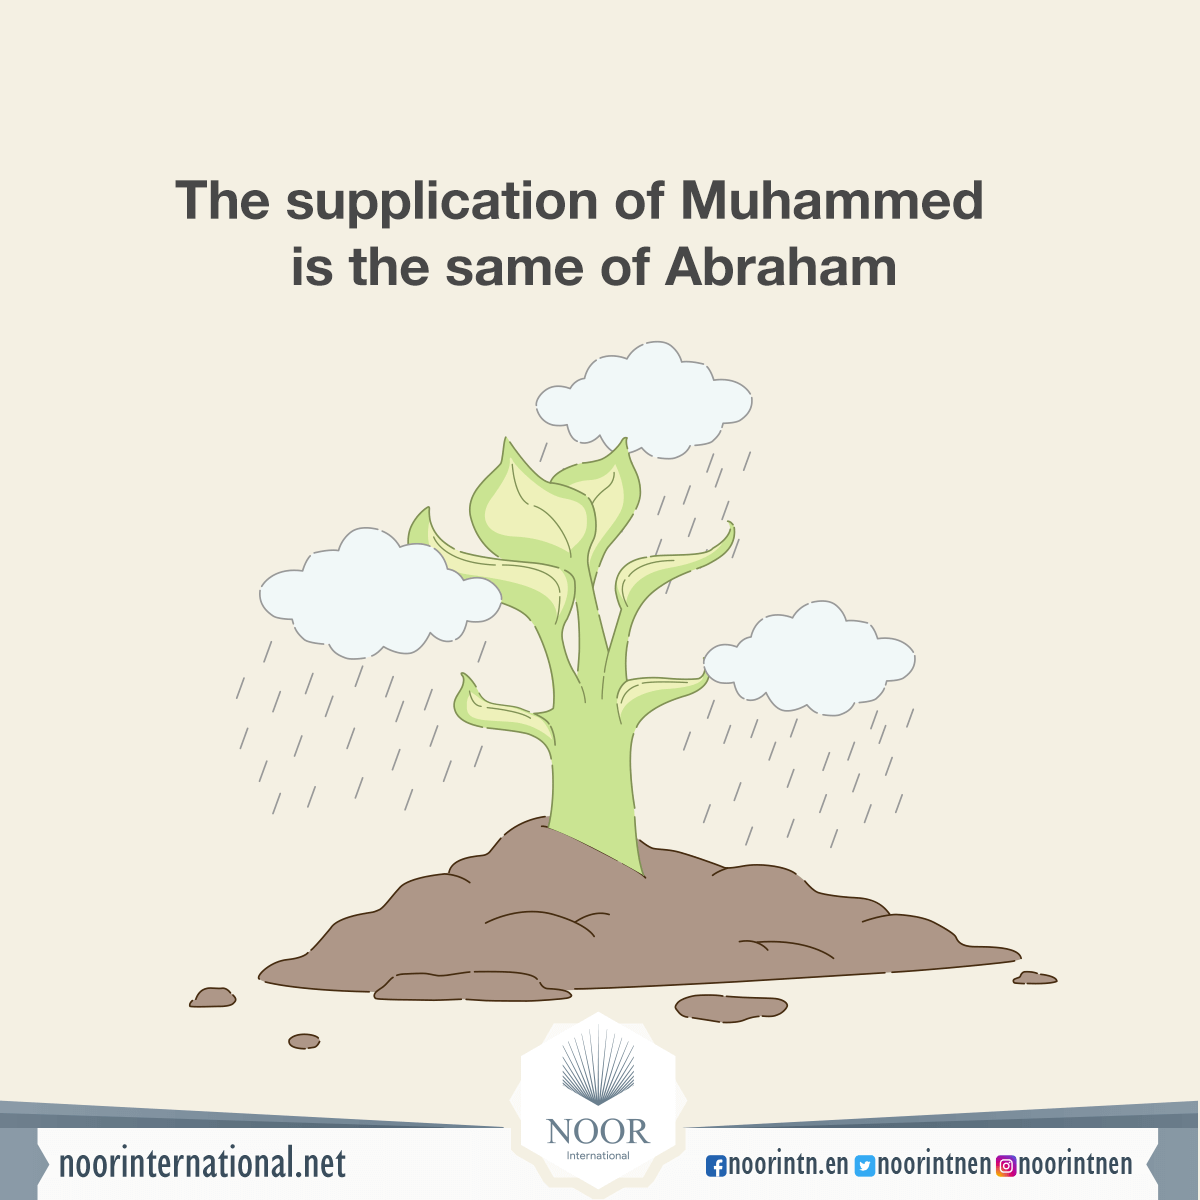 The supplication of Muhammed is the same of Abraham